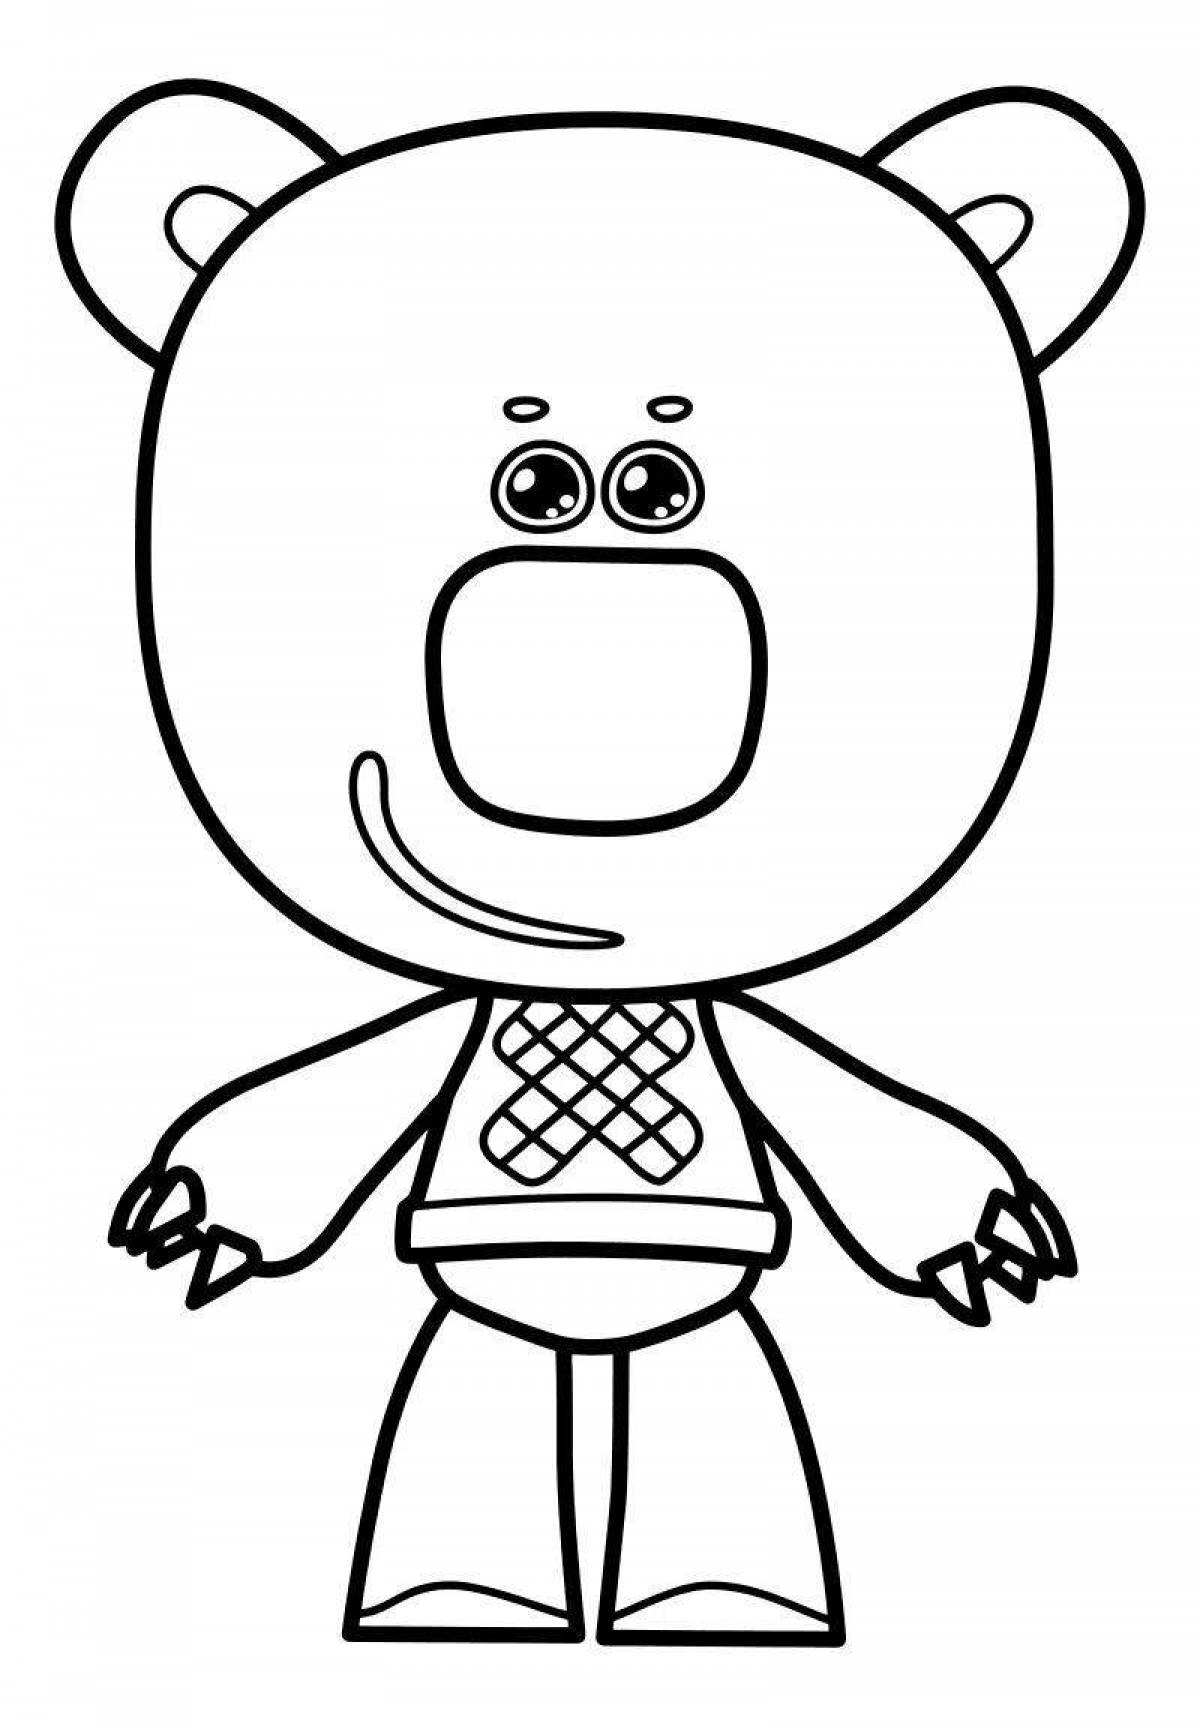 Adorable bear coloring pages for girls